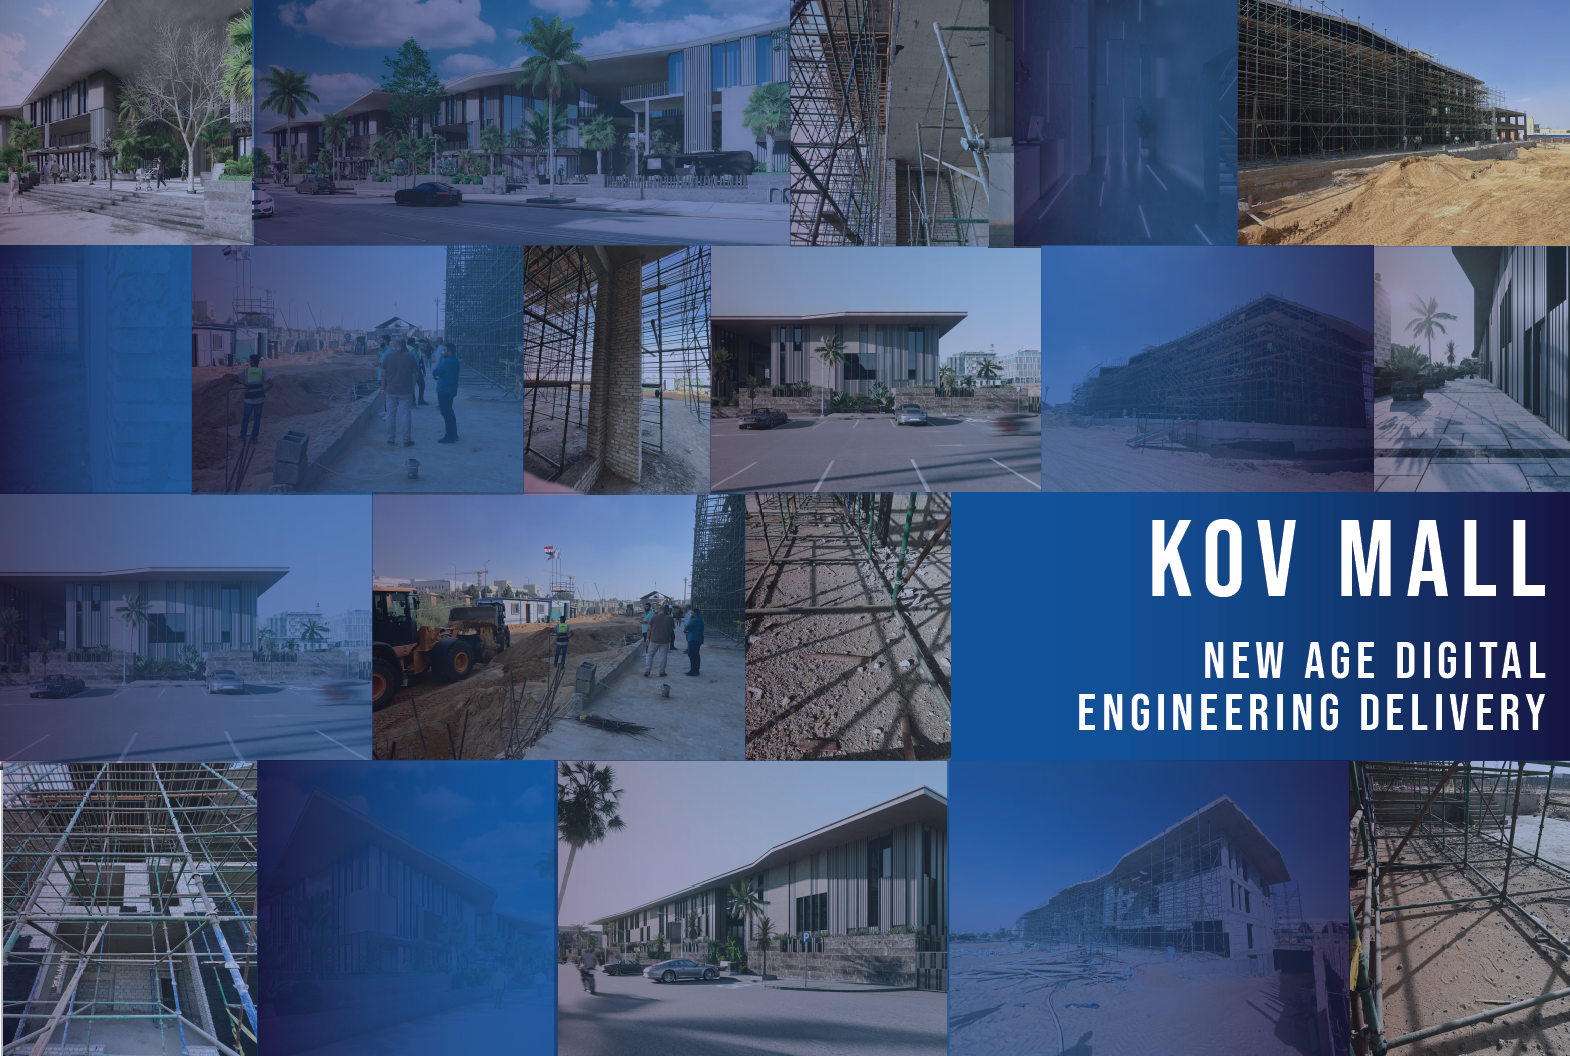 KOV Mall - New Age Digital Engineering Delivery